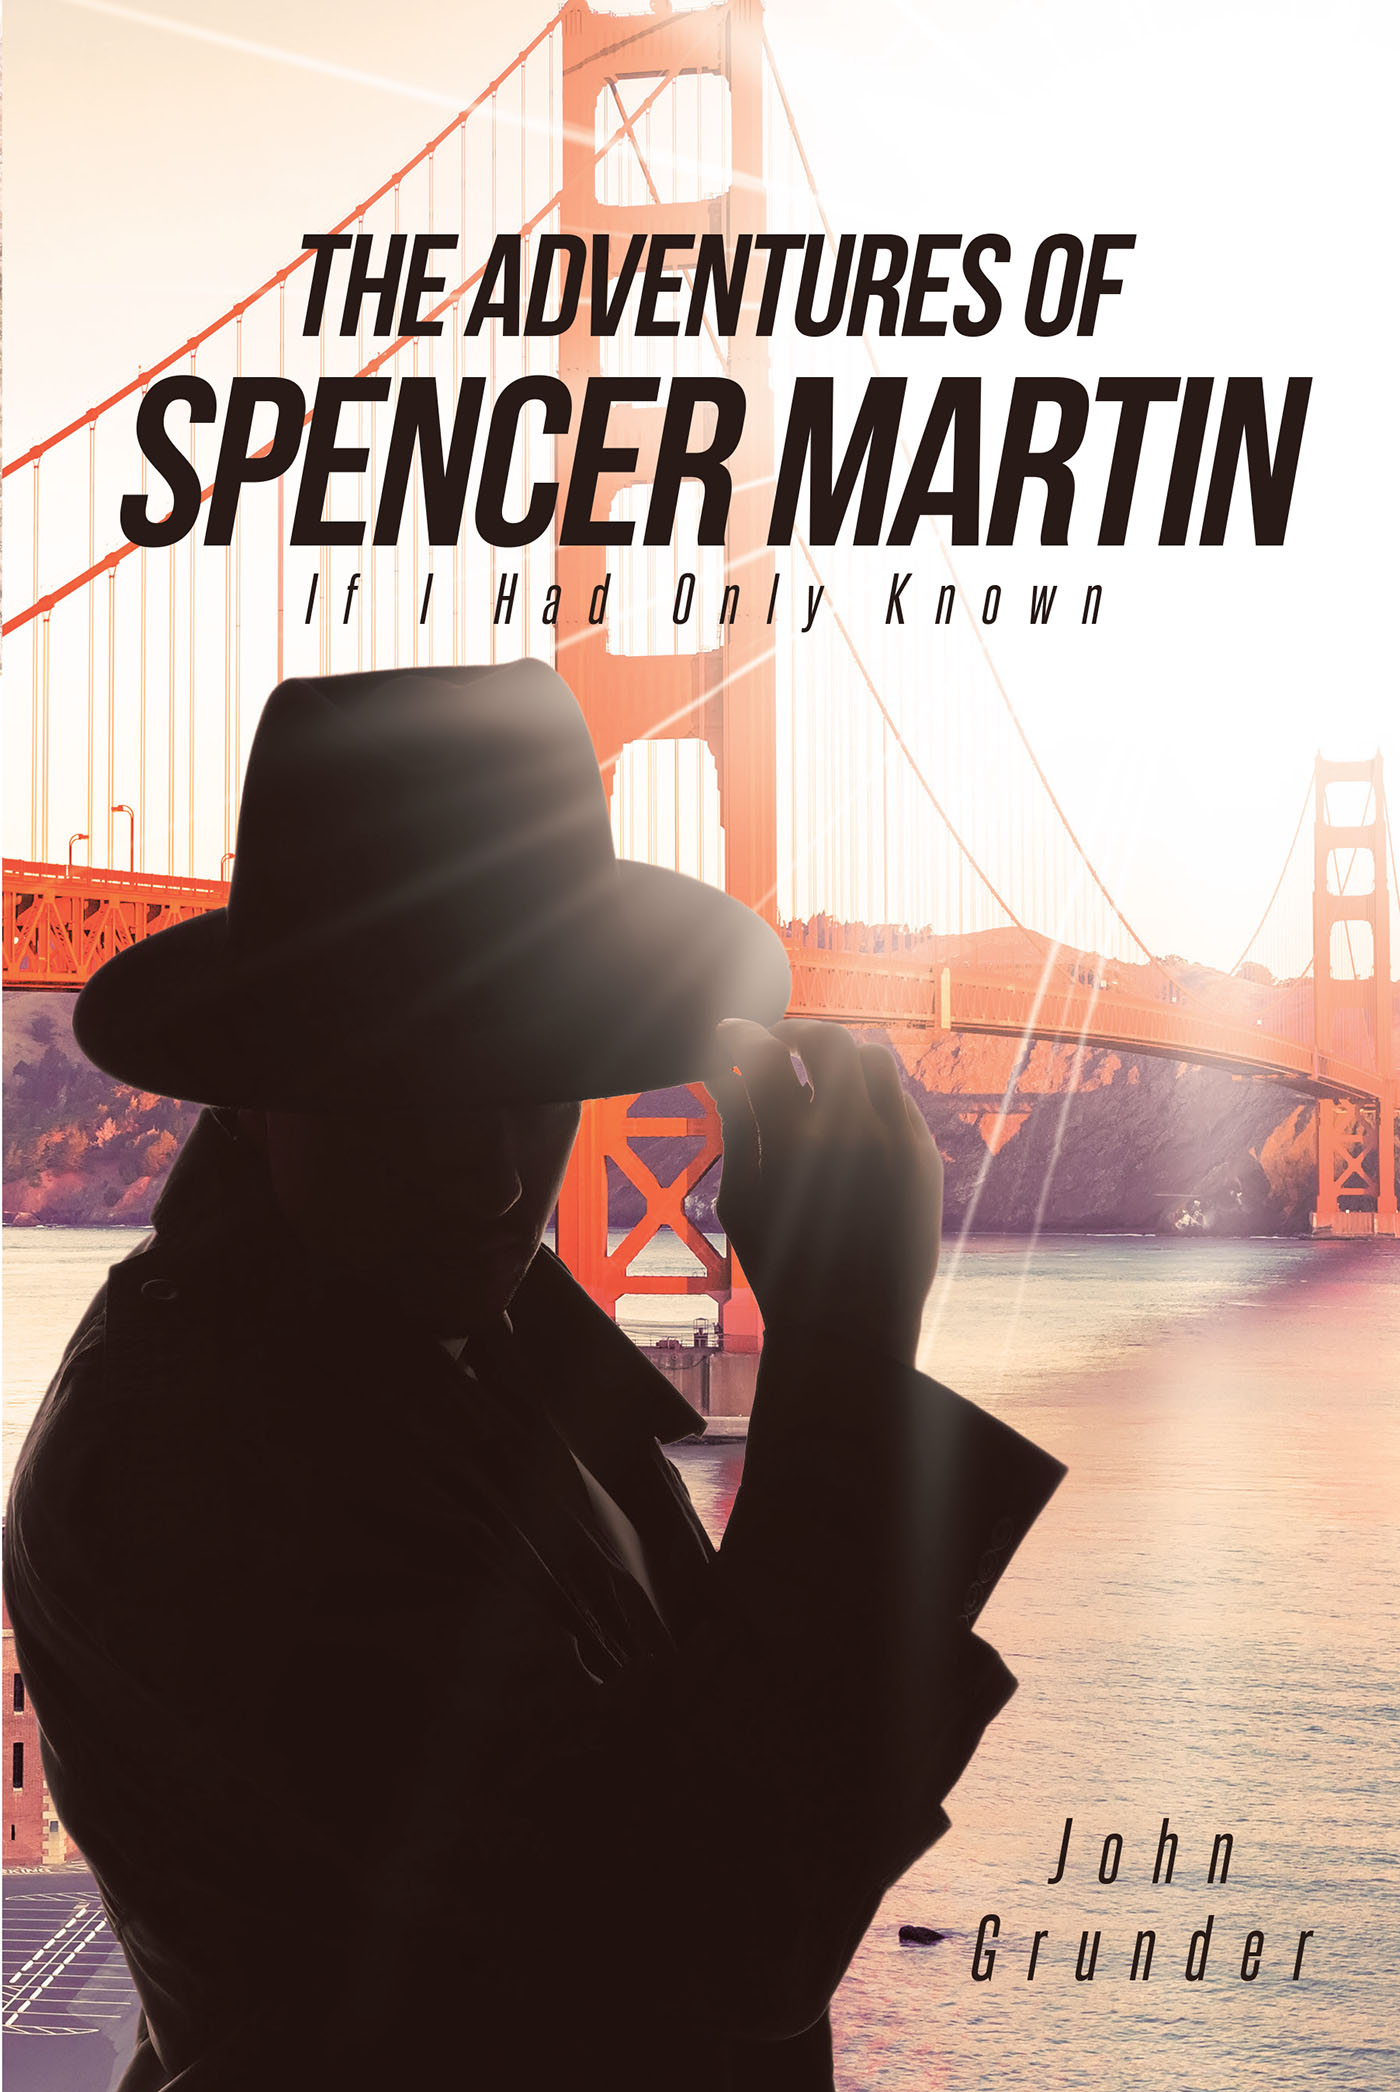 John Grunder’s Book, “The Adventures of Spencer Martin: If I Had Only Known,” Follows the Story of a Man Who Joins the Army and Eventually Becomes a Private Detective